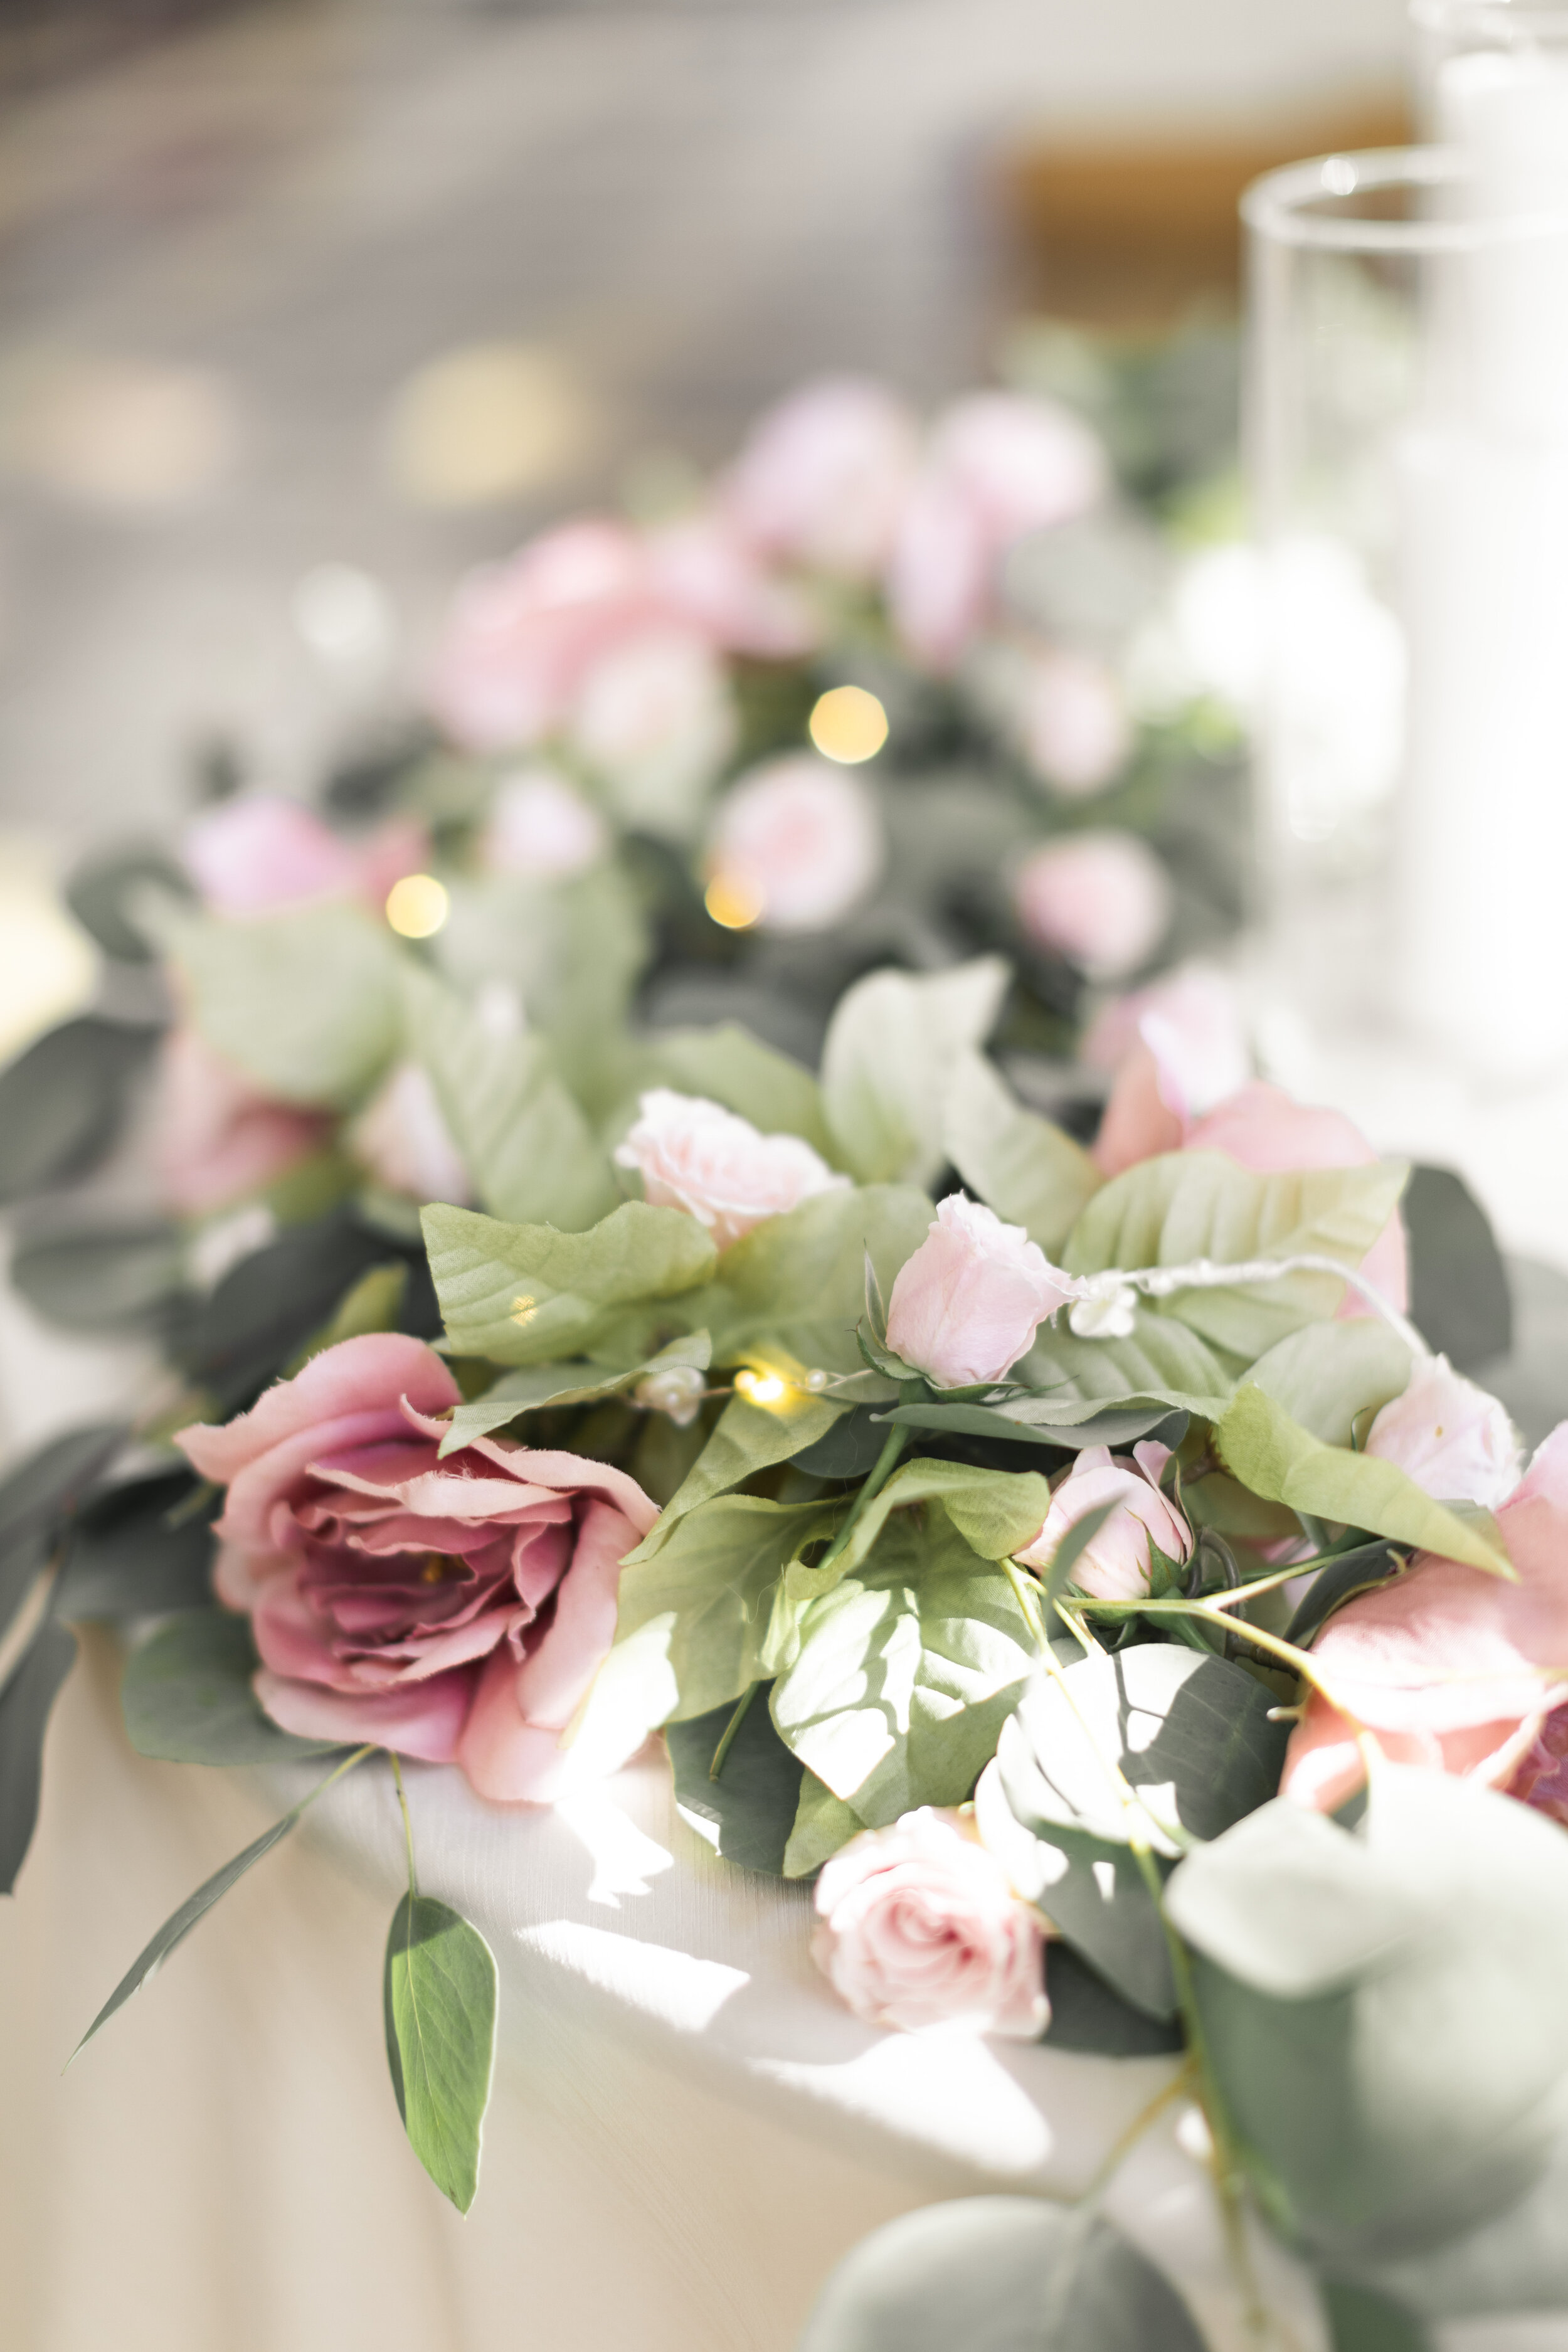  real or fake wedding flowers how to choose wedding flowers flowers for table decor wedding receptions flowers wedding floral design pink and green wedding flowers wedding flowers with lights&nbsp;#claritylanephotography #professionalweddingphotograp